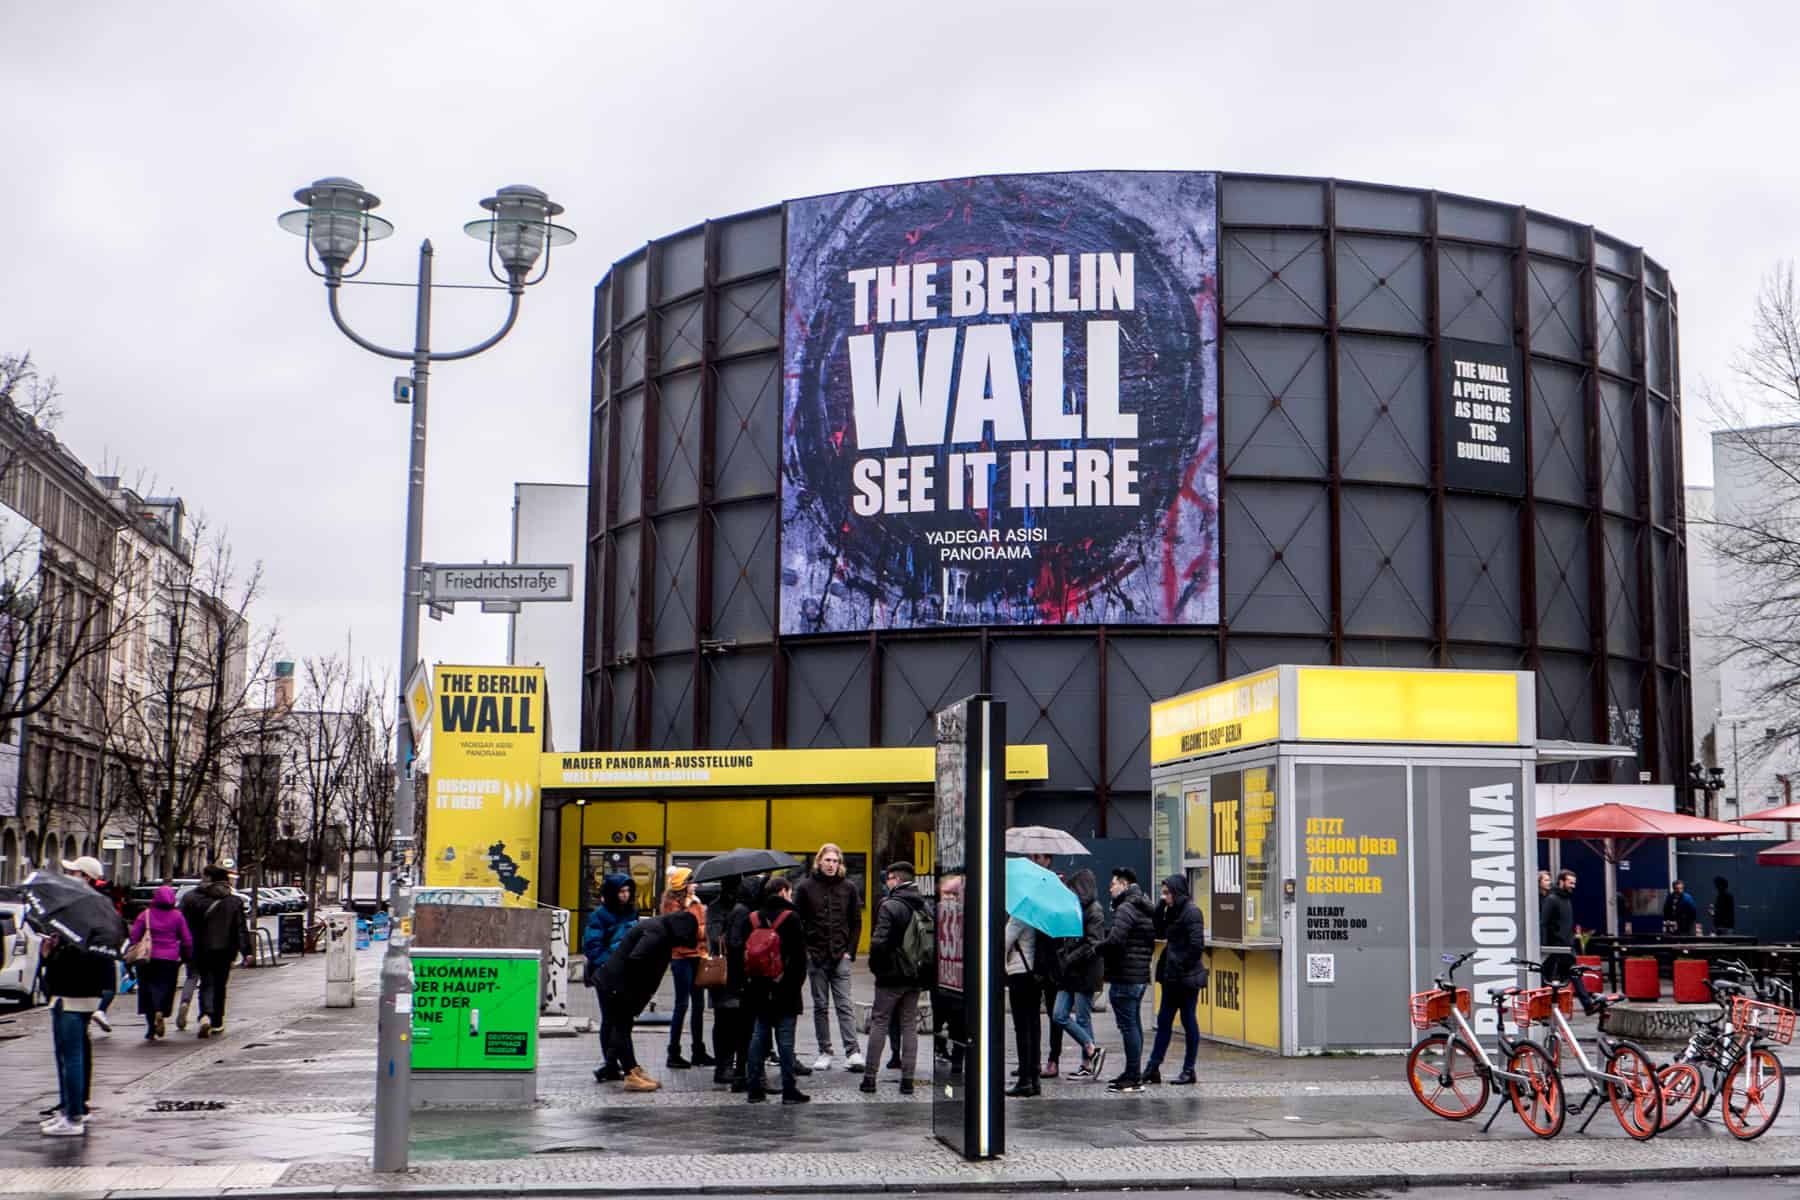 A large black barrel shape building with a purple Berlin Wall sign that houses a panorama image